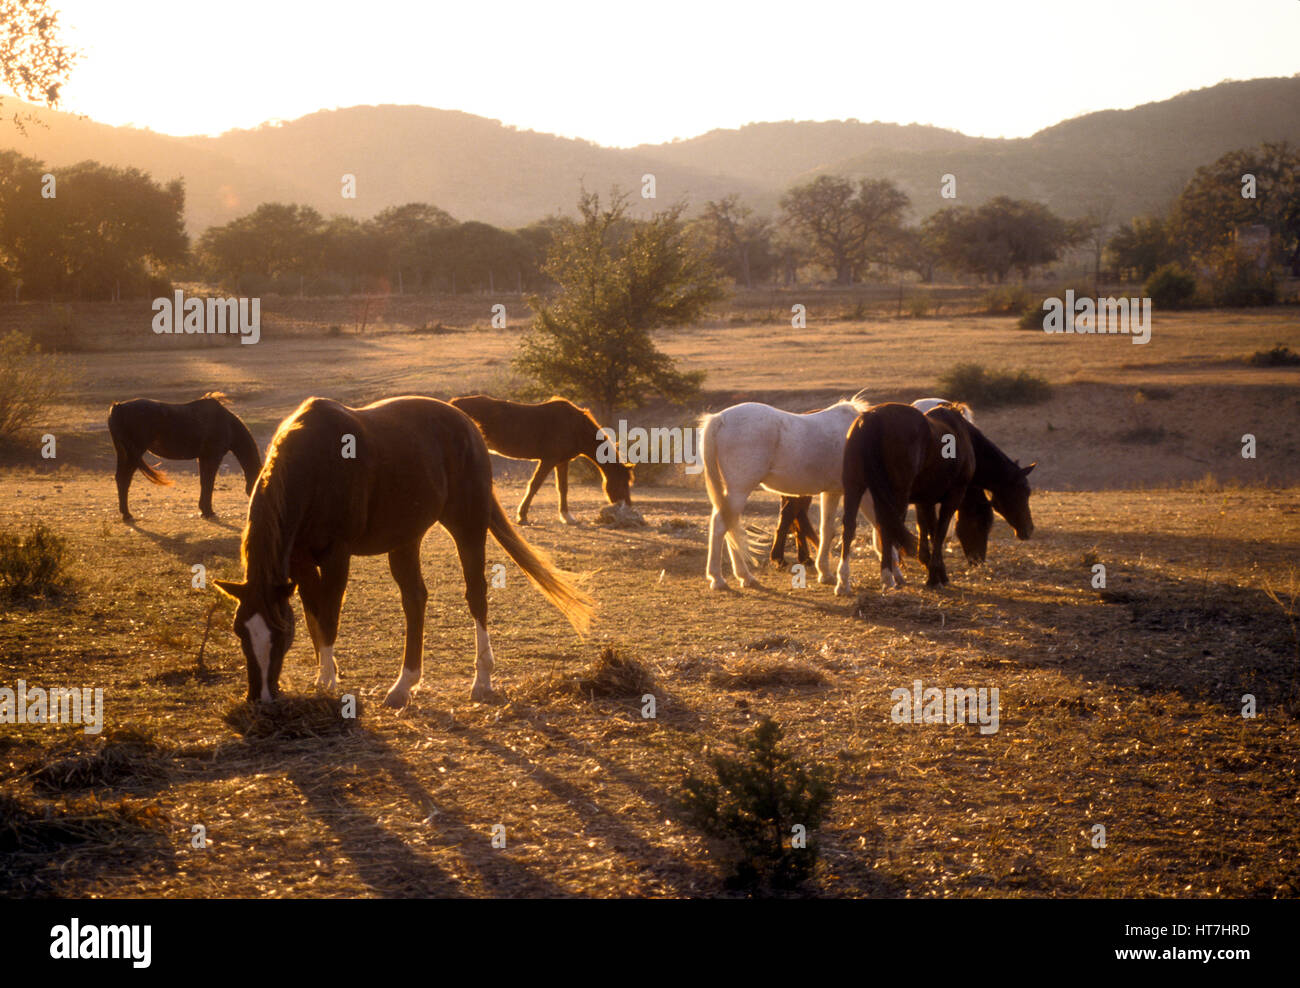 Horses Grazing In Pasture At Bandera In Texas Hill Country Stock Photo